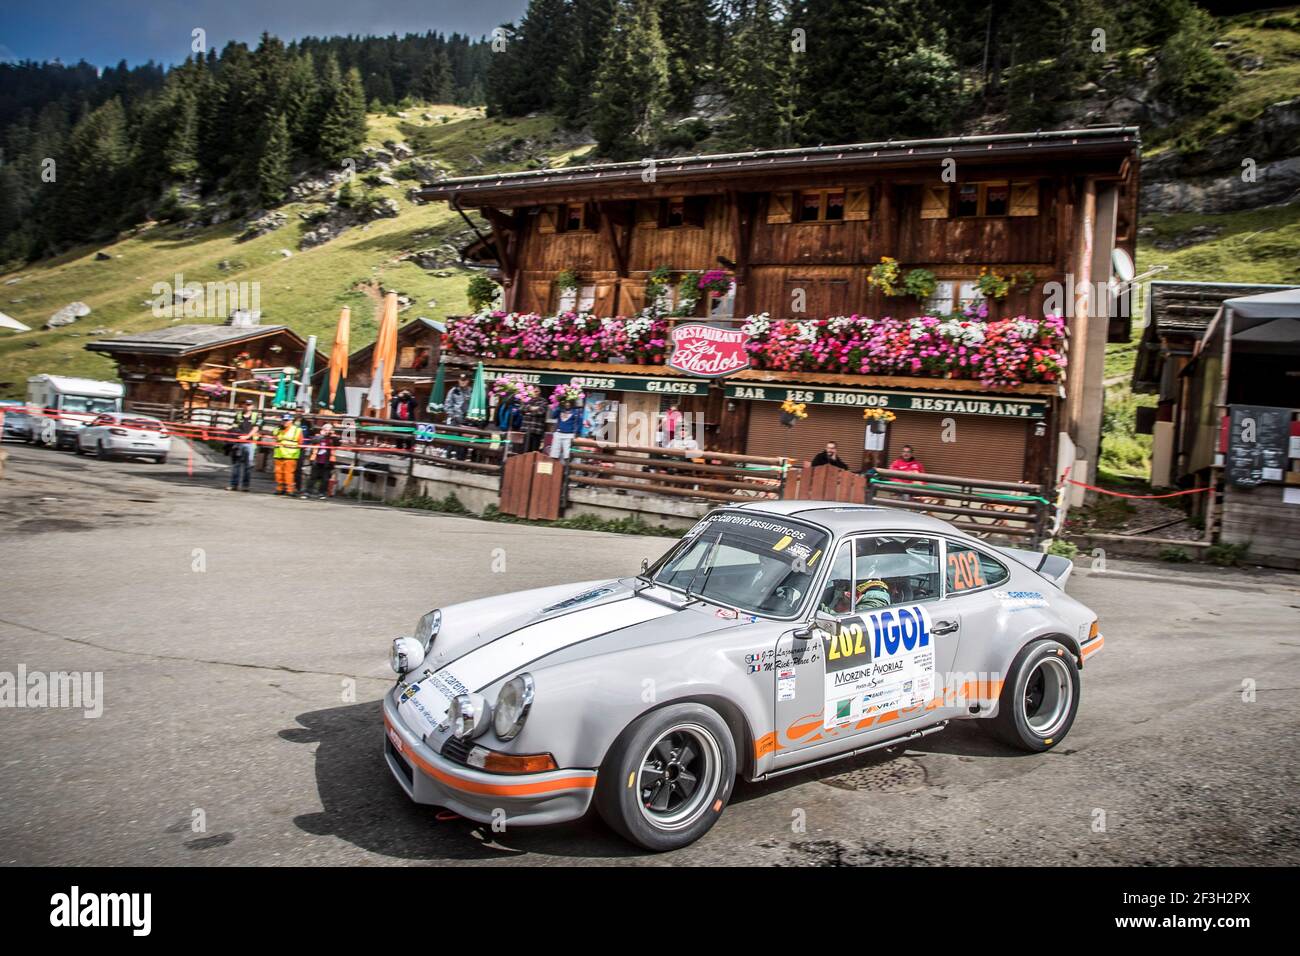 202 LAJOURNADE JP, RICK-PLACE Martine, Porsche CARRERA RS, action, during  the 2018 French rally championship, rallye du Mont-Blanc from september 6  to 8 at Morzine, France - Photo Gregory Lenormand / DPPI Stock Photo - Alamy